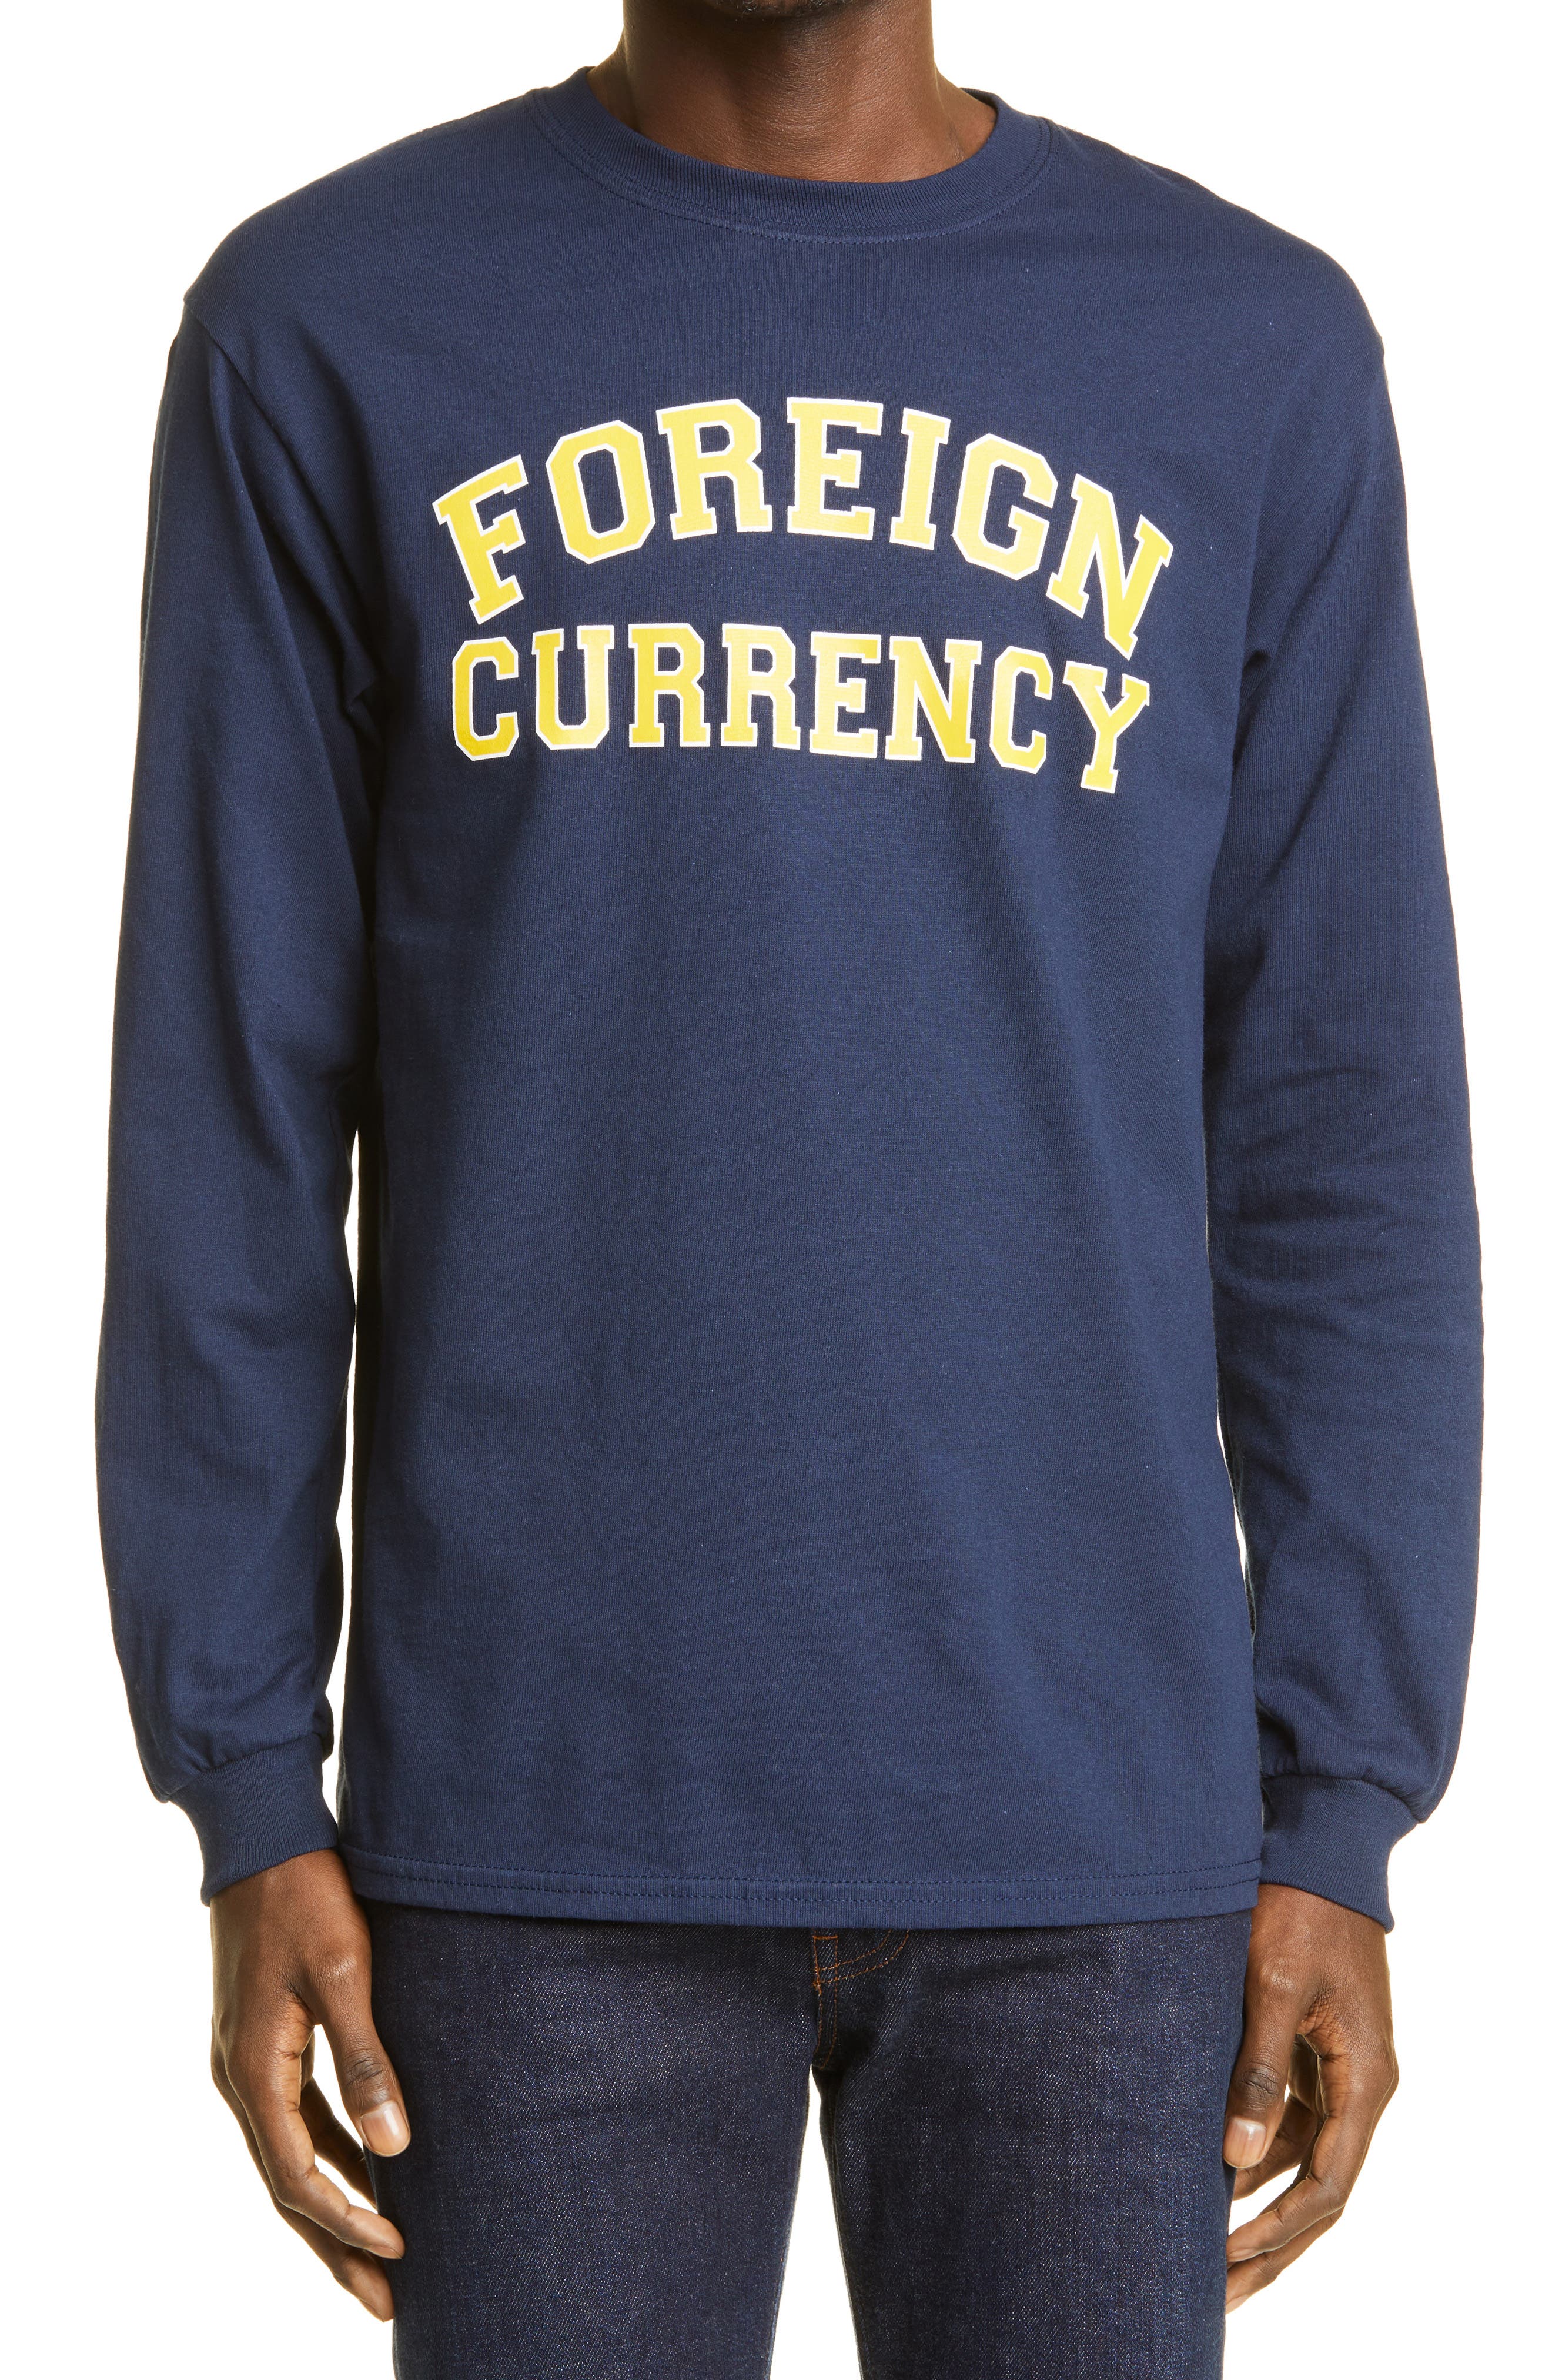 Foreign Currency Varsity Logo Long Sleeve Graphic Tee